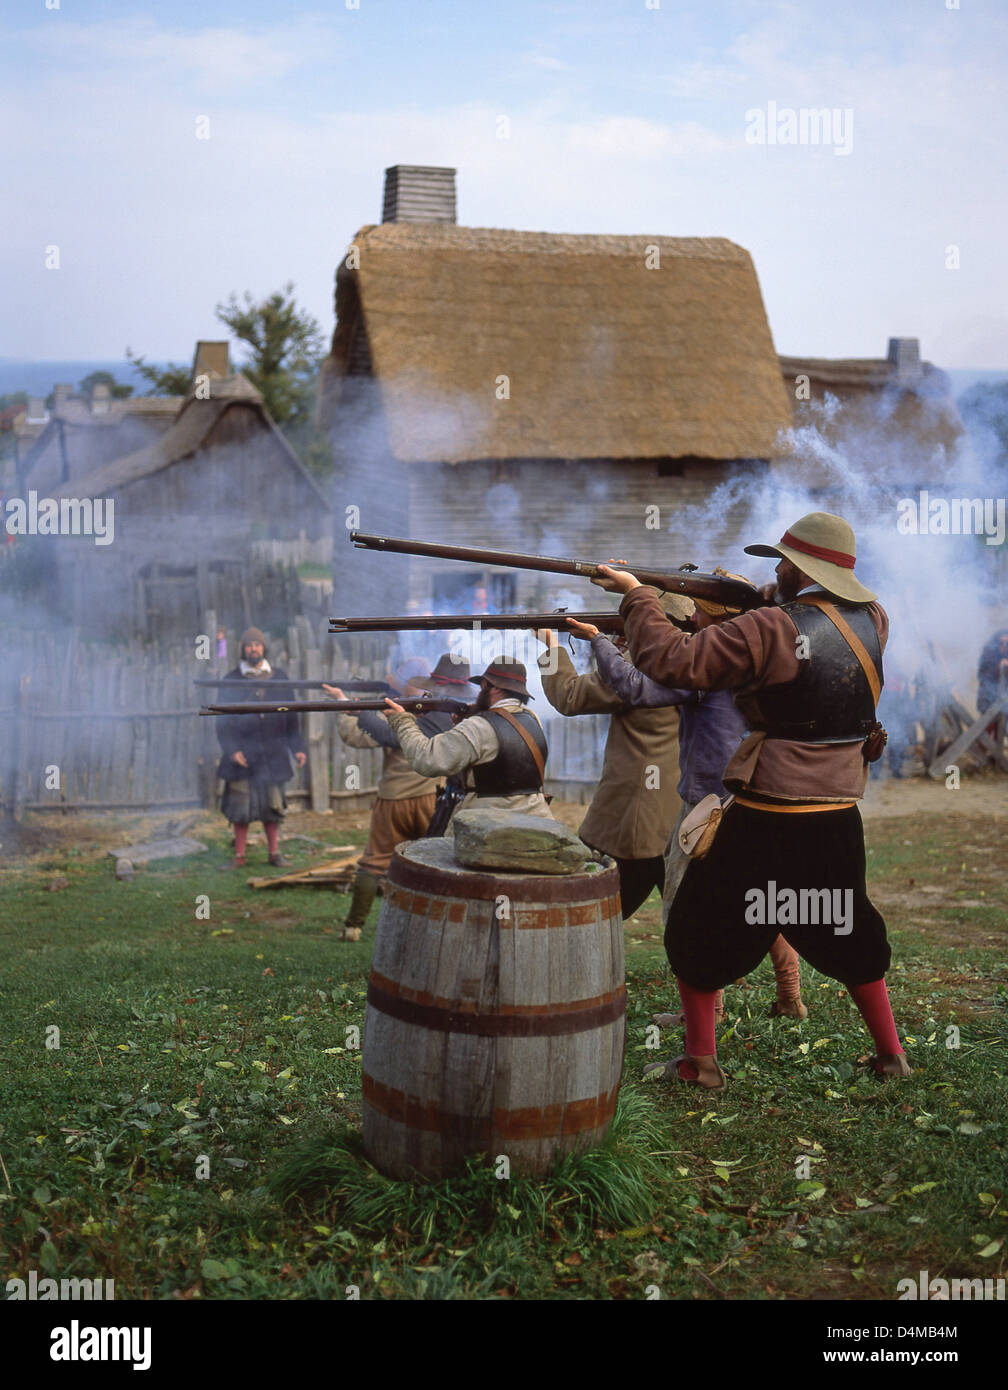 Pilgrims firing muskets in Plimoth Plantation, Plymouth, Massachusetts, United States of America Stock Photo